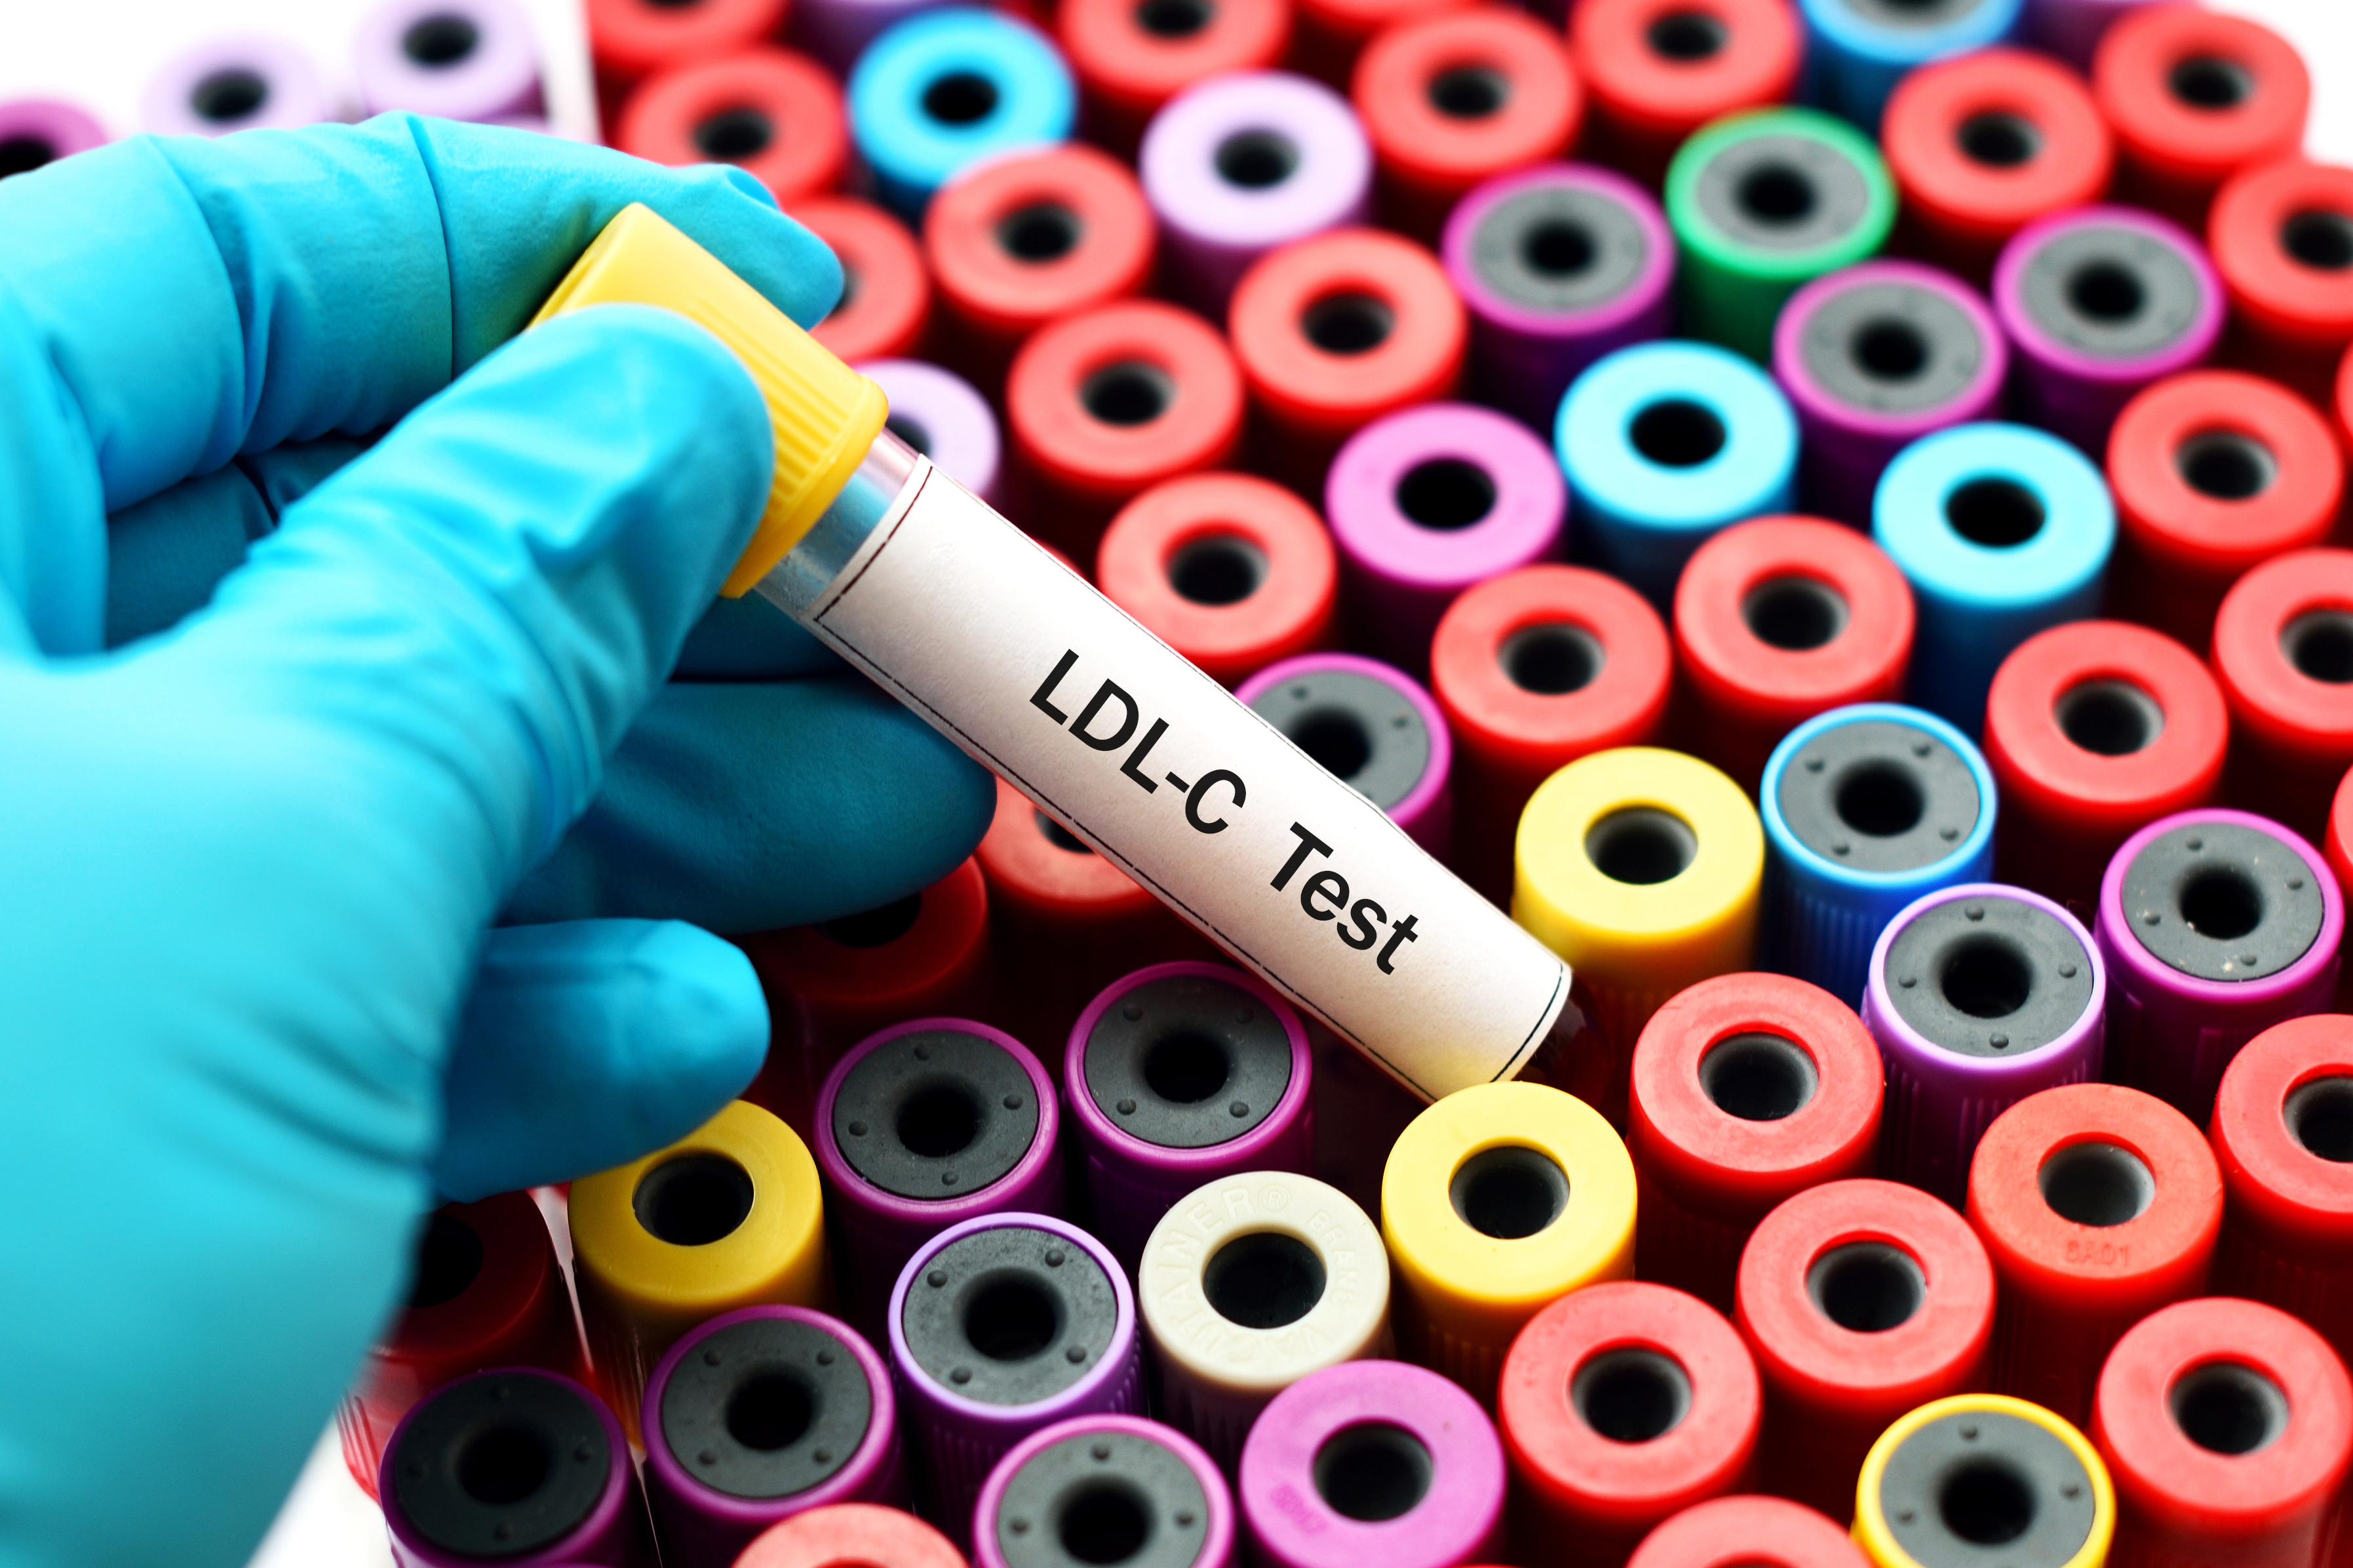 High cholesterol and lipid disorders